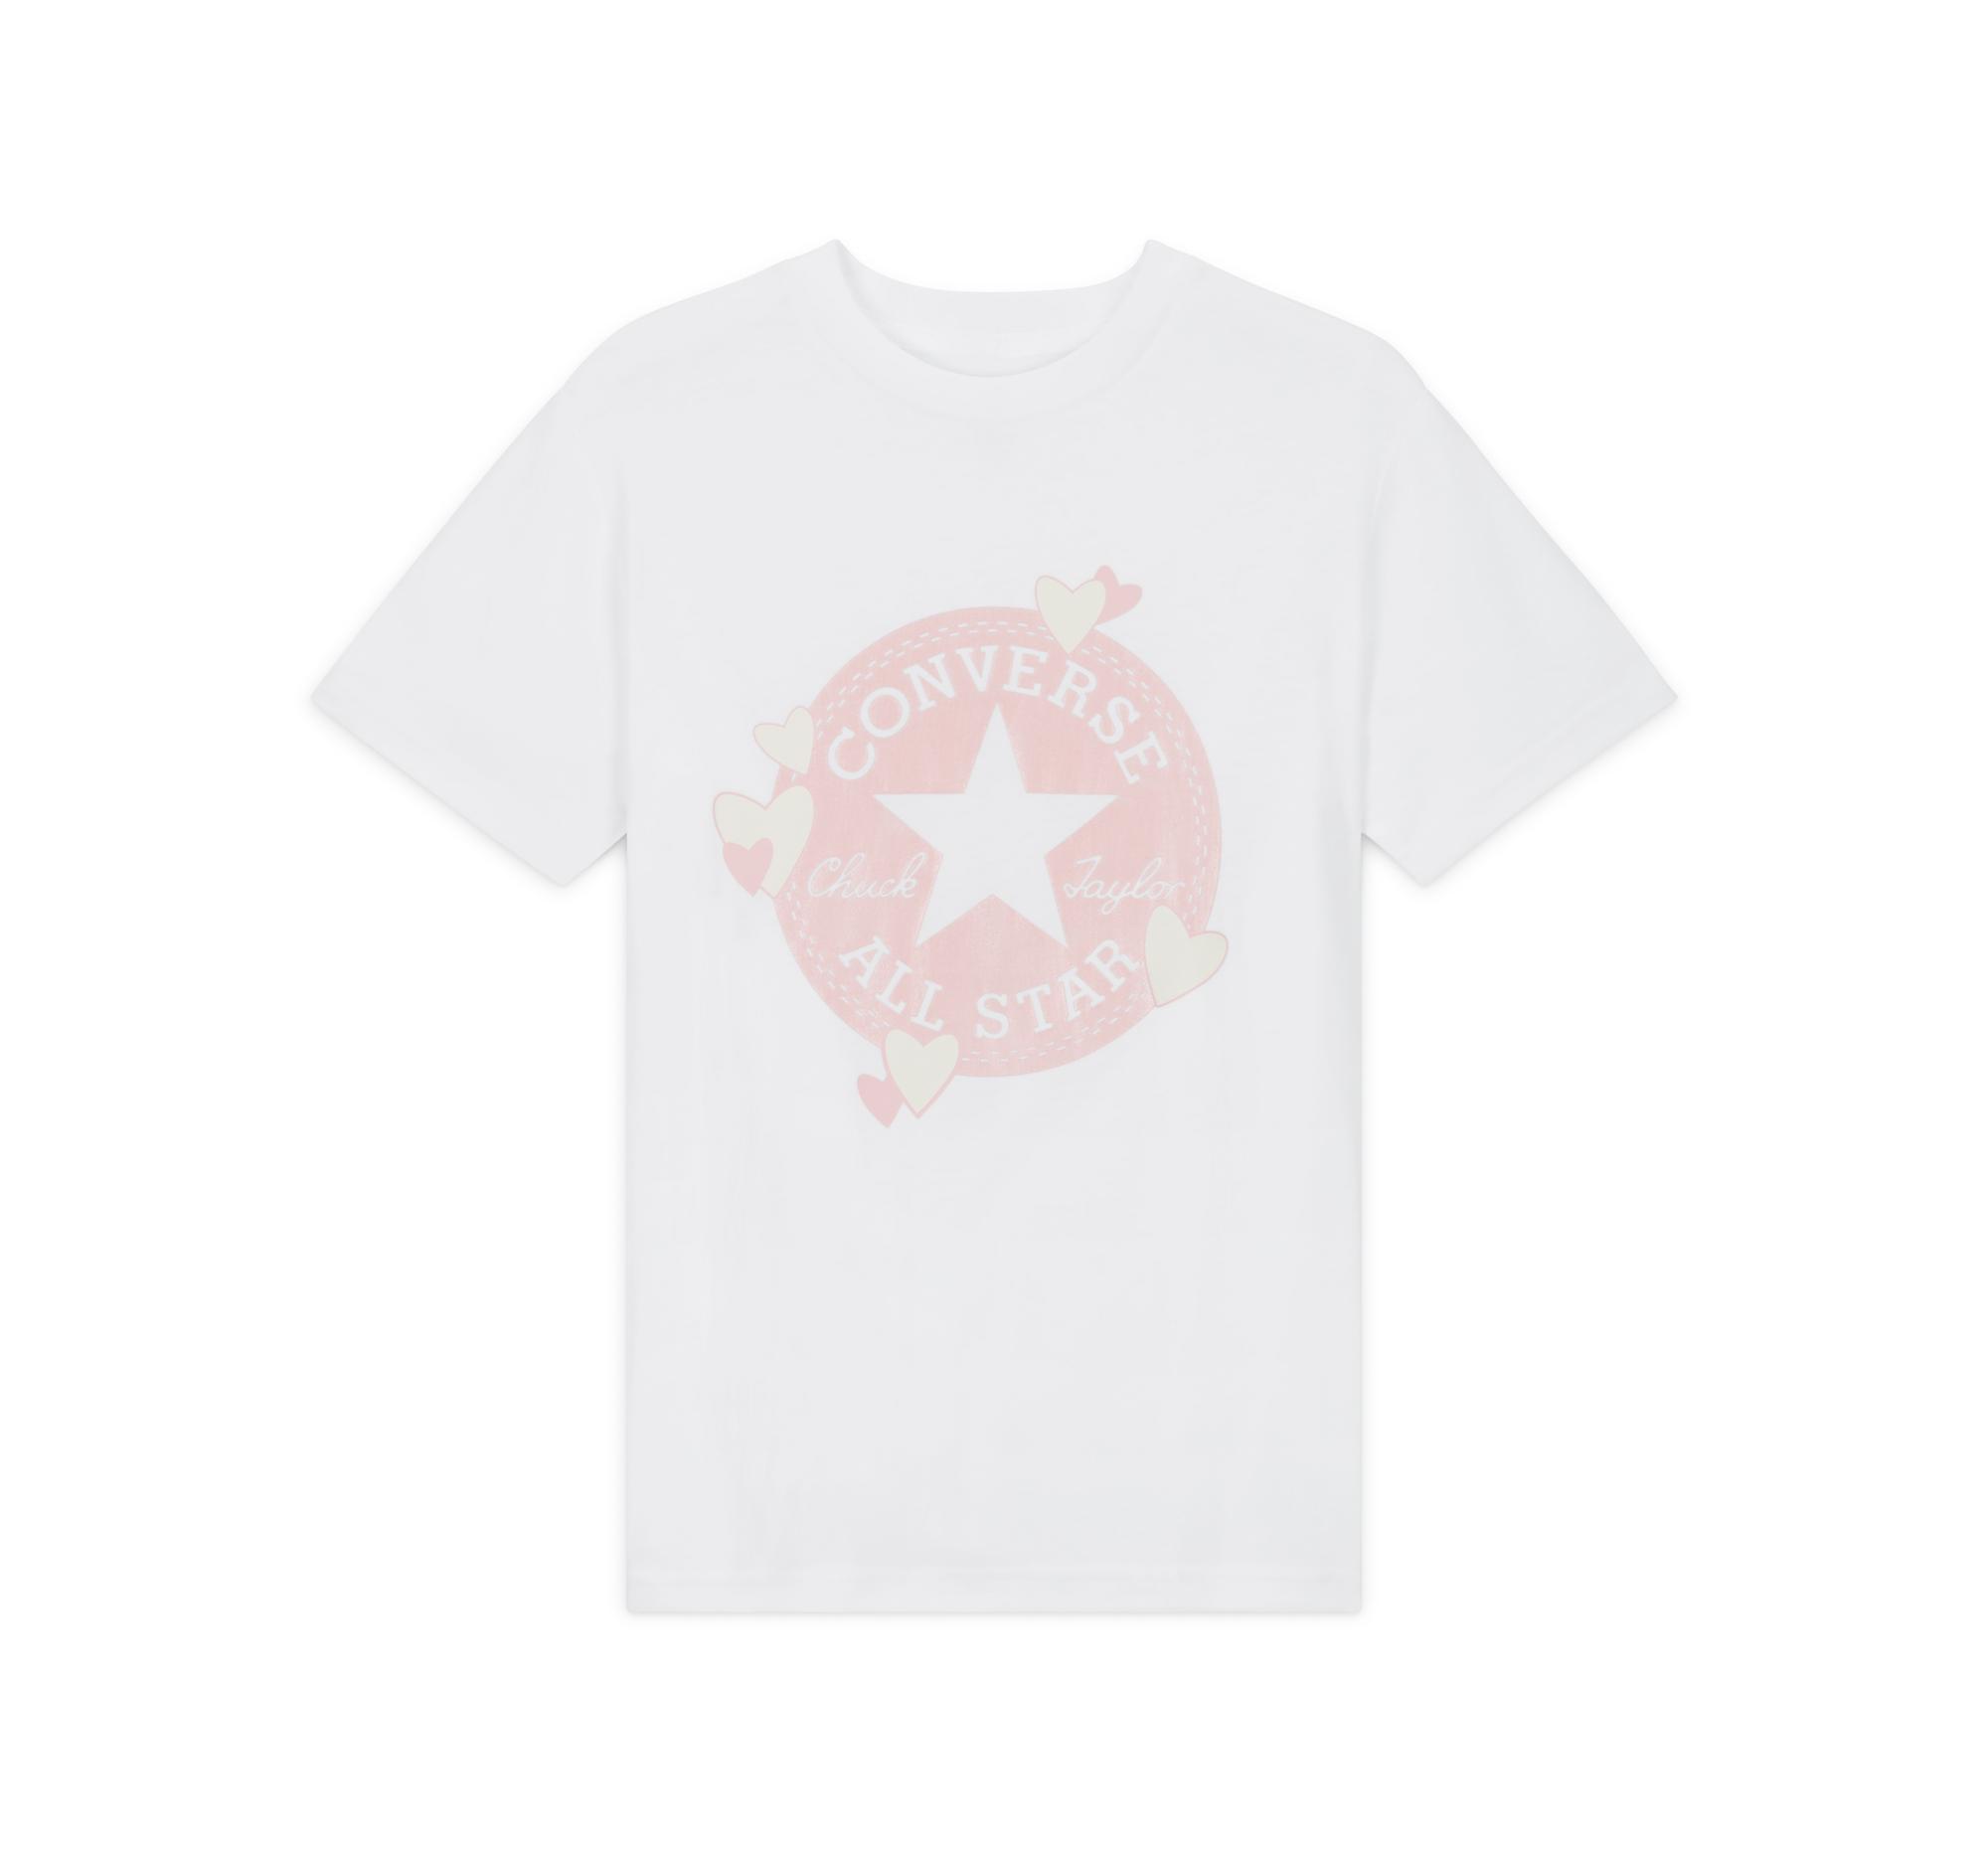 Converse Heart All Star Patch T-shirt in White | Lyst